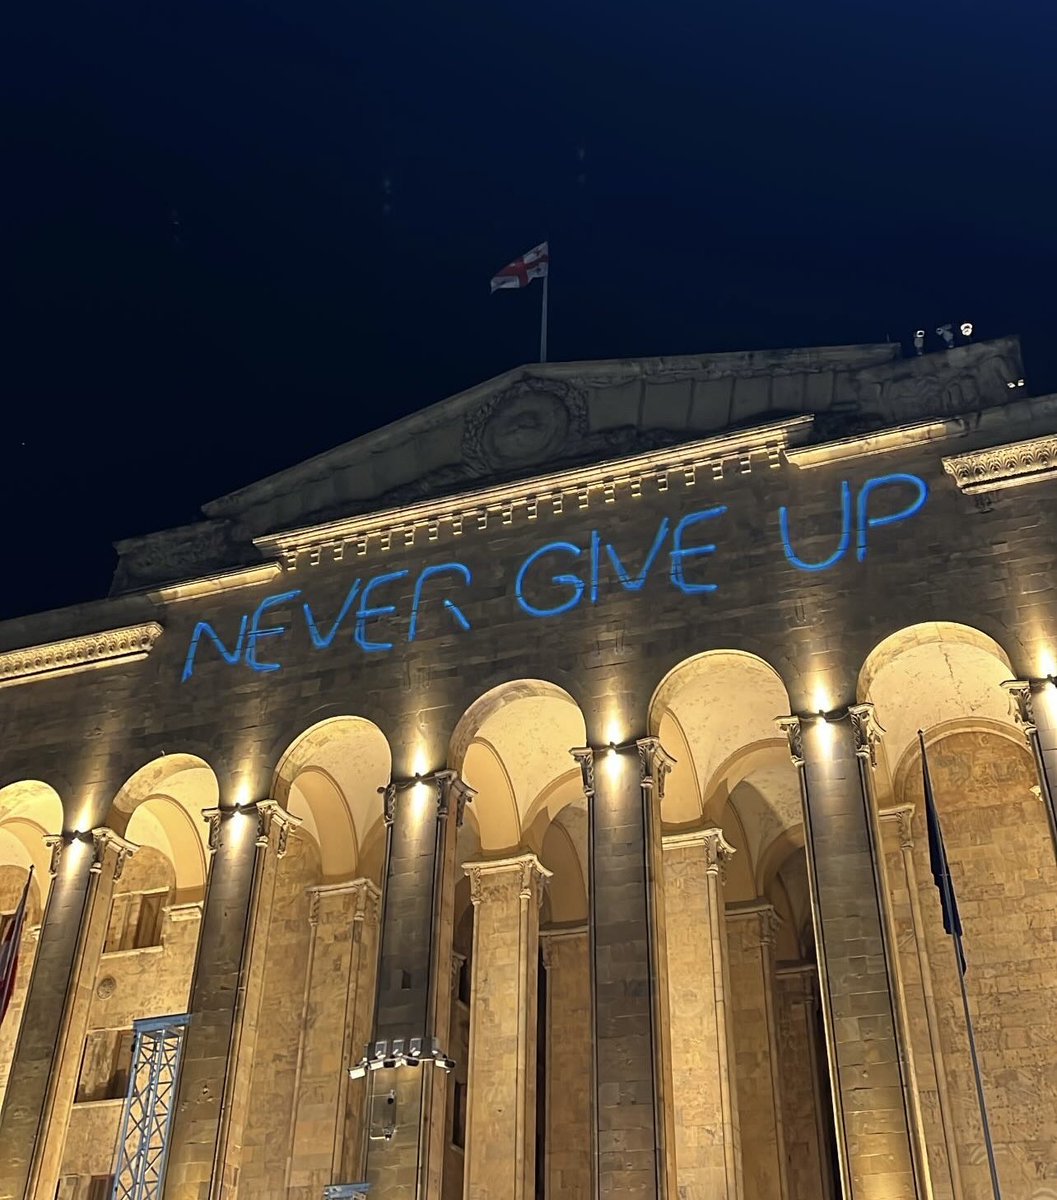 It's 23:59 in #Georgia: Laser inscription on the parliament: 'Never give up!' ✌🏻 We will never give up. We will protect our Euro-Atlantic future! Uninterrupted protests continue in several locations. All important streets are blocked. #NoToRussianLaw #TbilisiProtests #Tbilisi